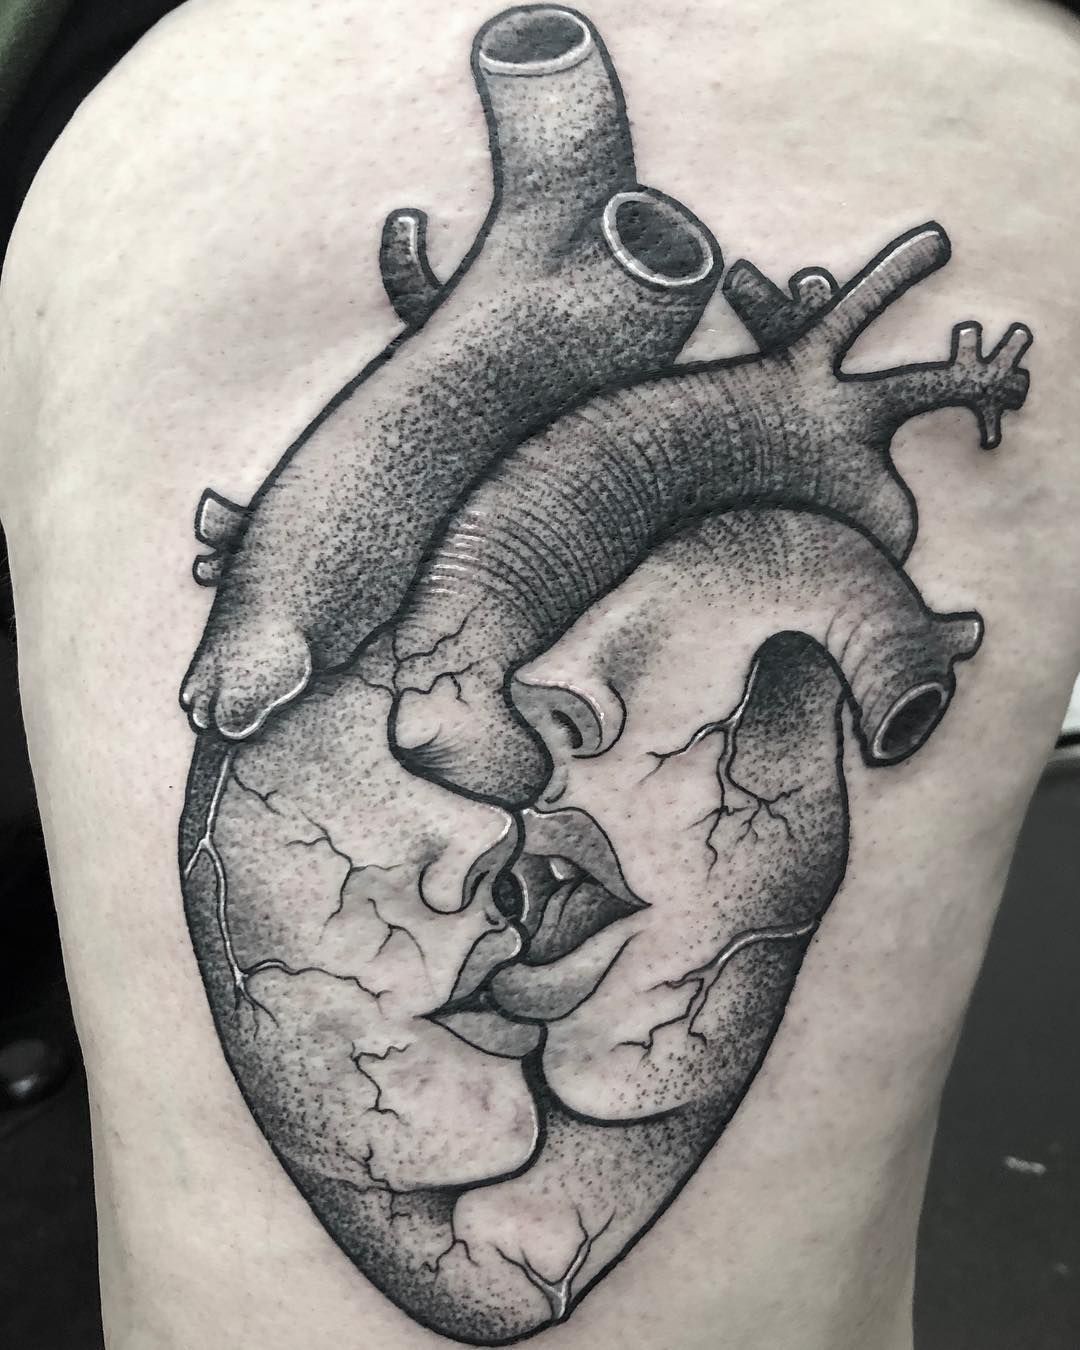 Anatomical Heart Tattoo Designs For Guys With Meaning (20)